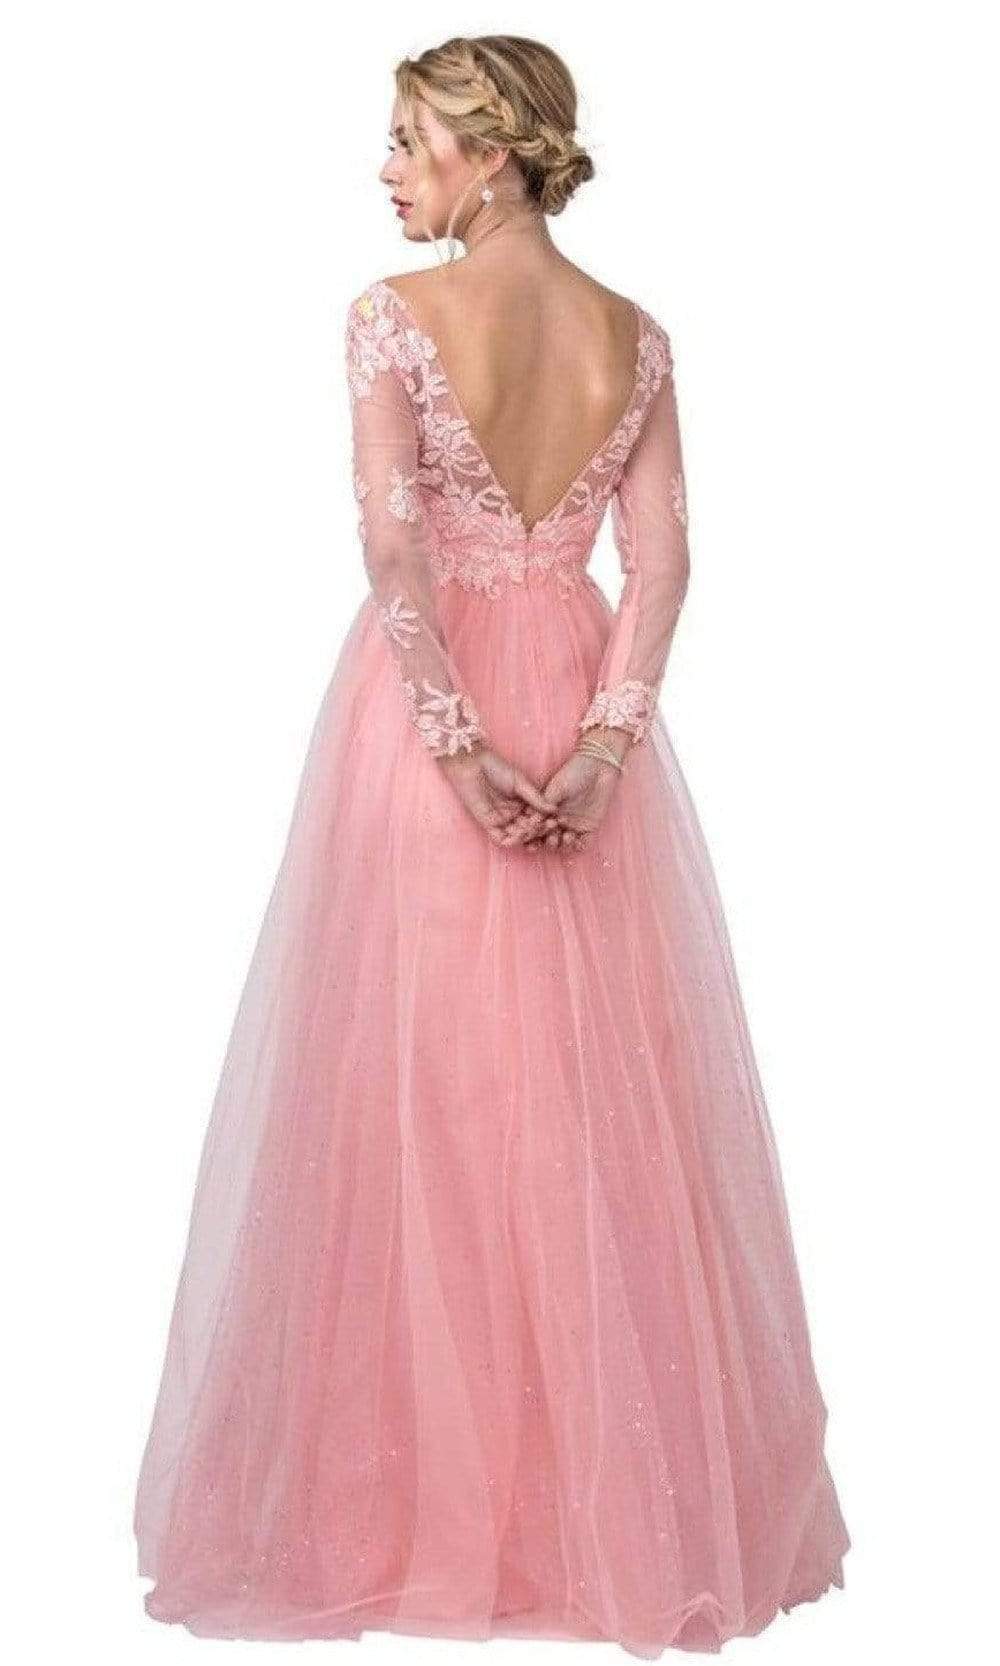 Aspeed Design - L2372 Dreamy Tulle Glittered A-Line Gown Prom Dresses